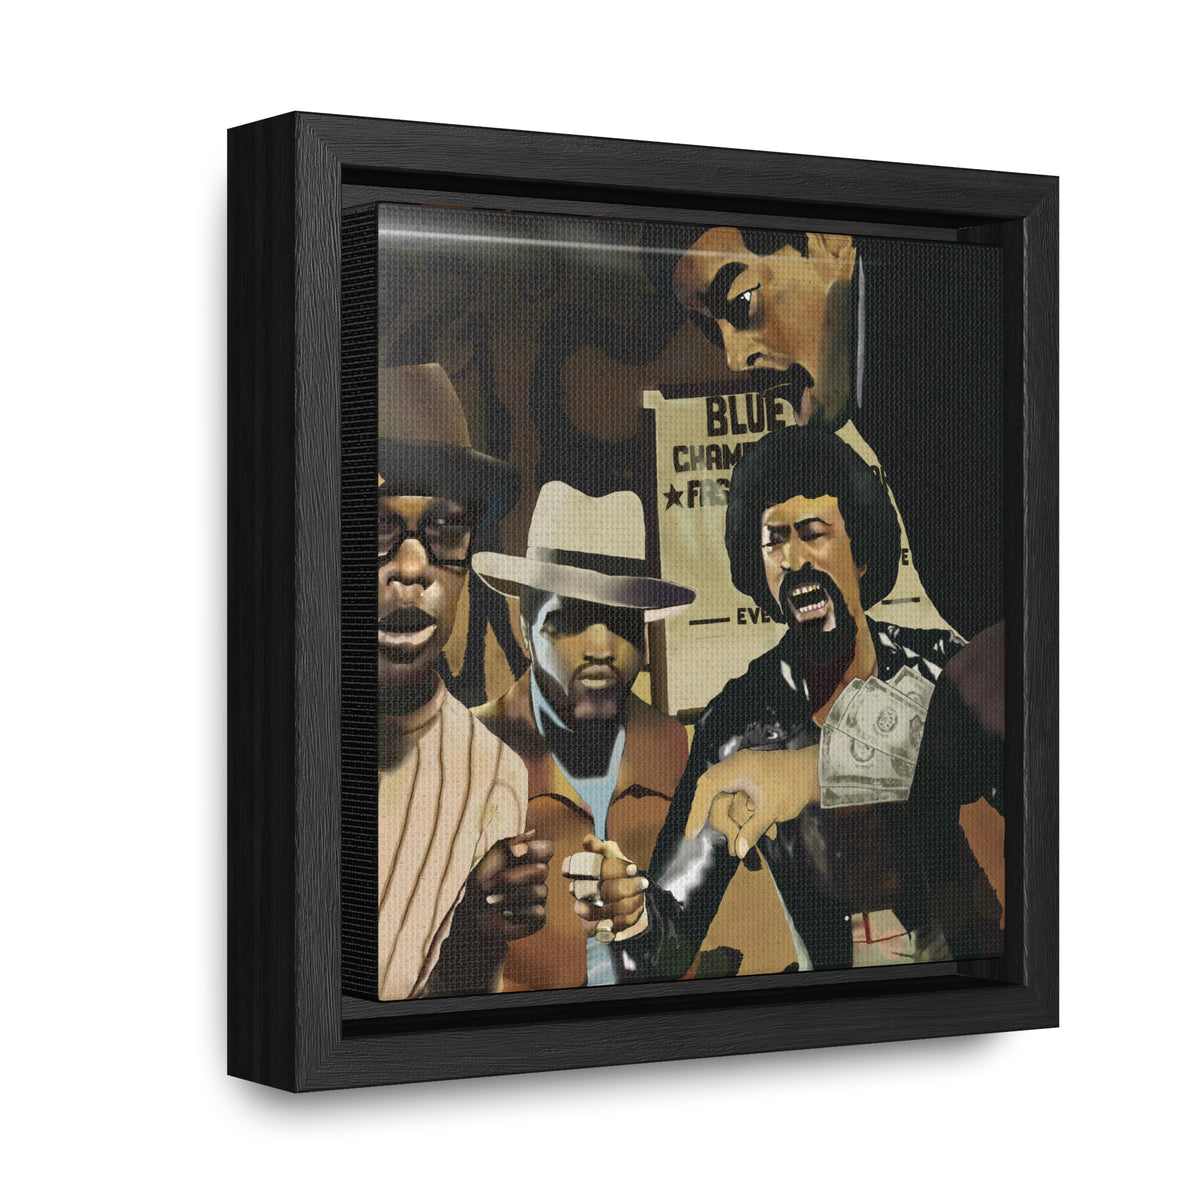 You know the name of the game Gallery Canvas Wraps, Square Frame